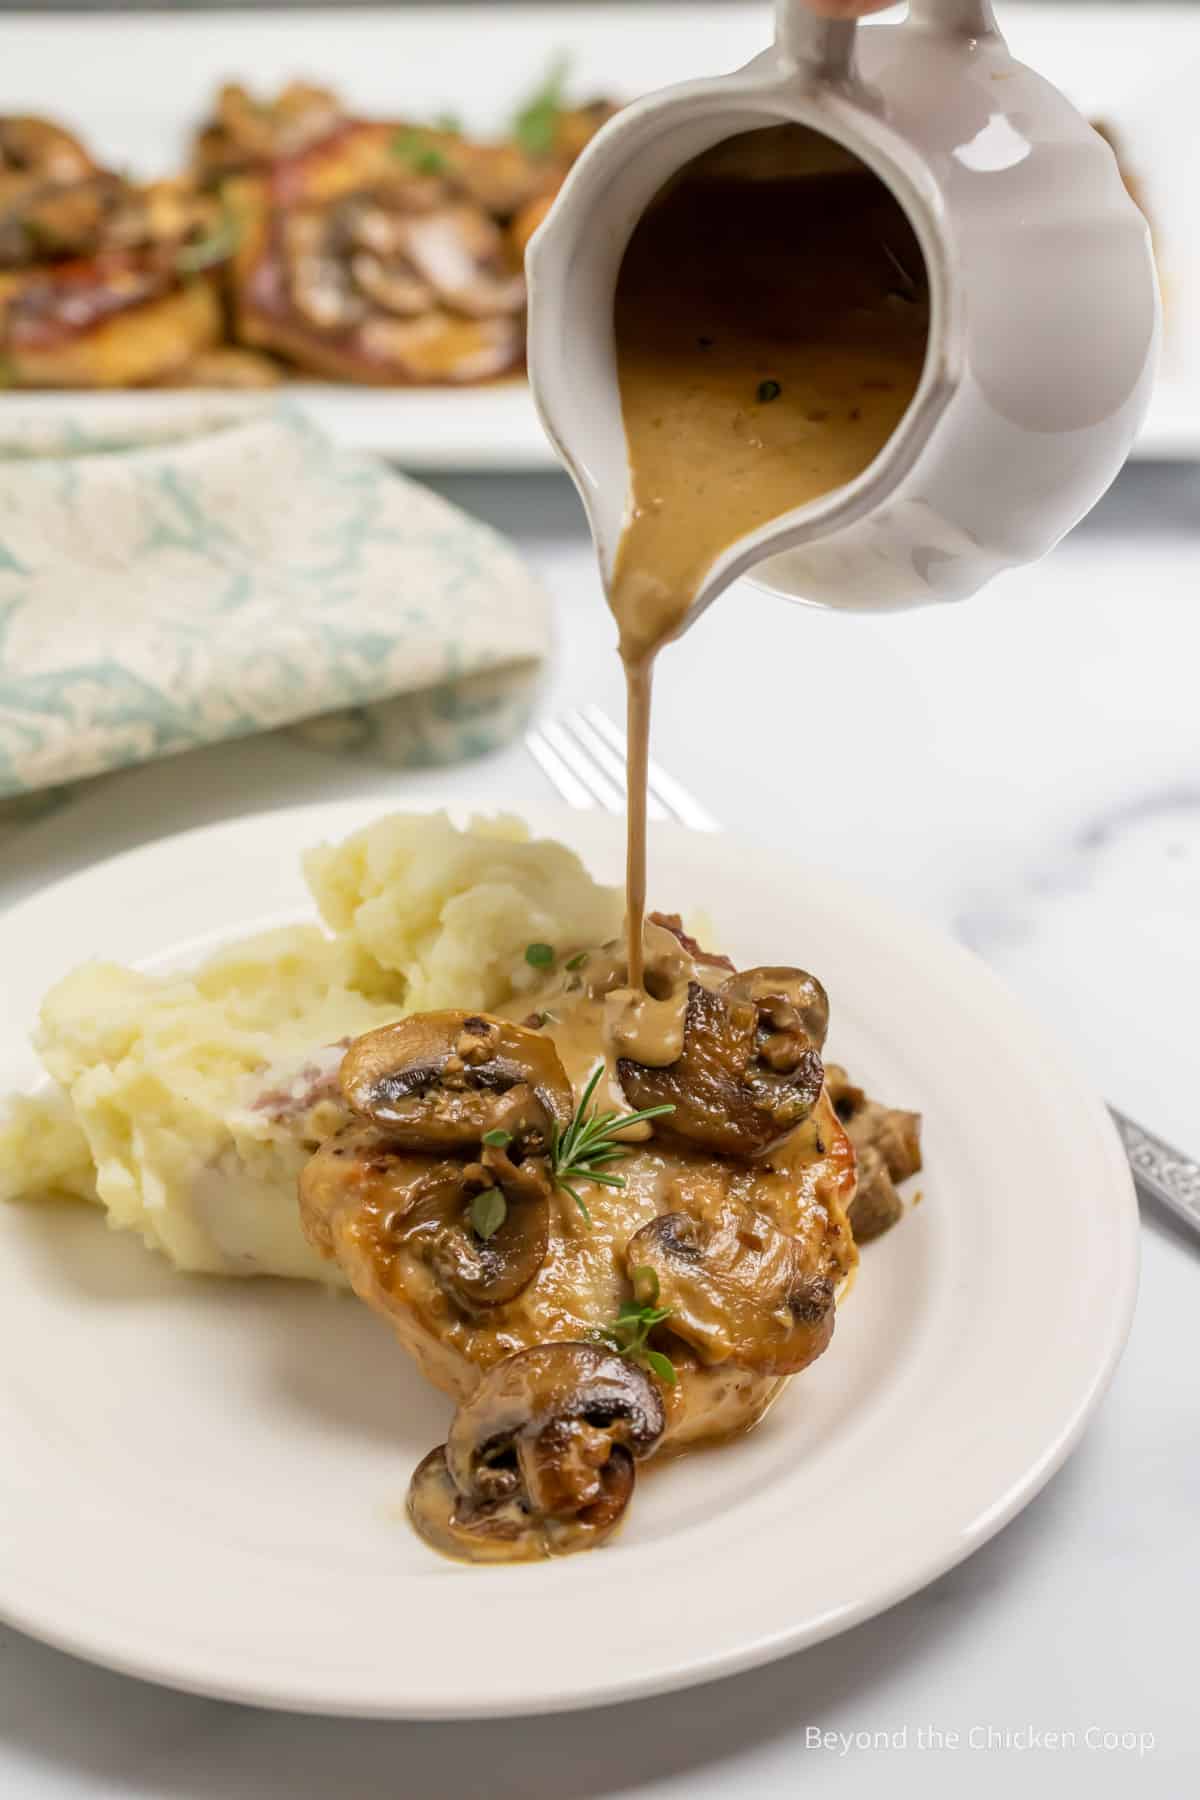 Pouring a sauce over pork with mushrooms.